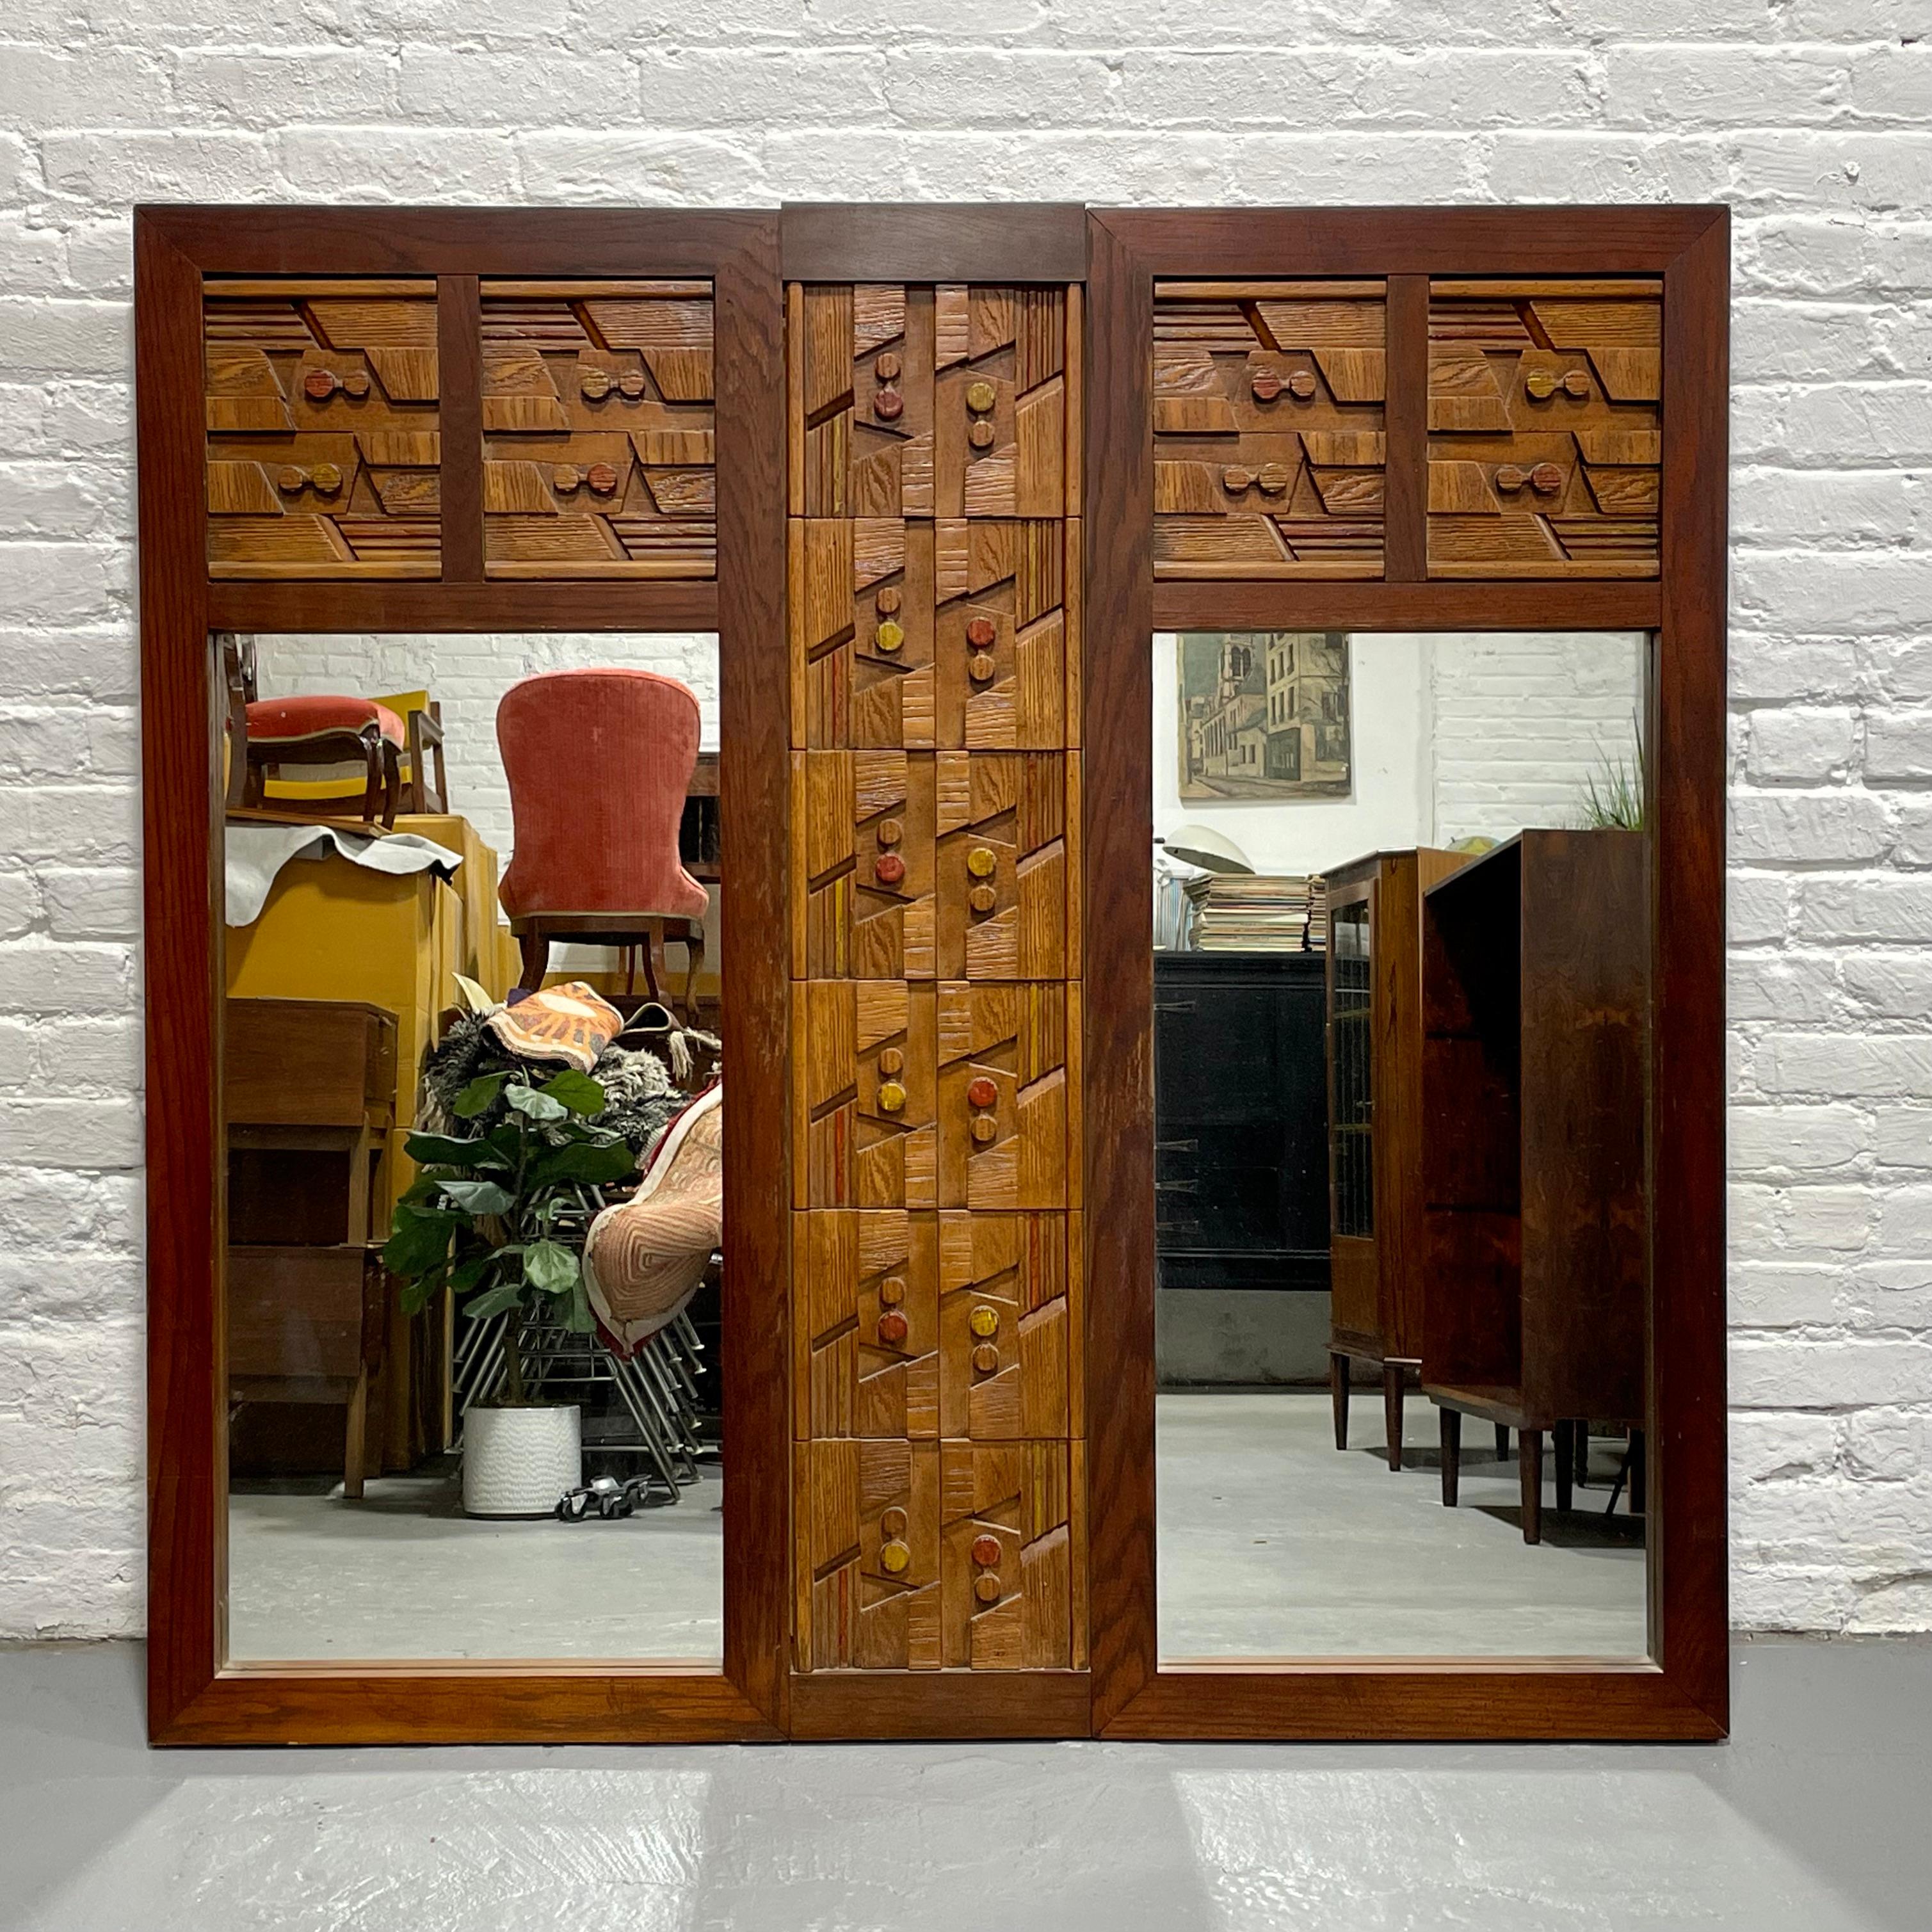 Huge Mid Century Modern Walnut Brutalist styled Mirror in the style of Paul Evans, circa 1960's. The façade consists of a highly textured pattern of rough hewn shapes and each piece was carefully sculpted from solid wood with brutalist, pueblo